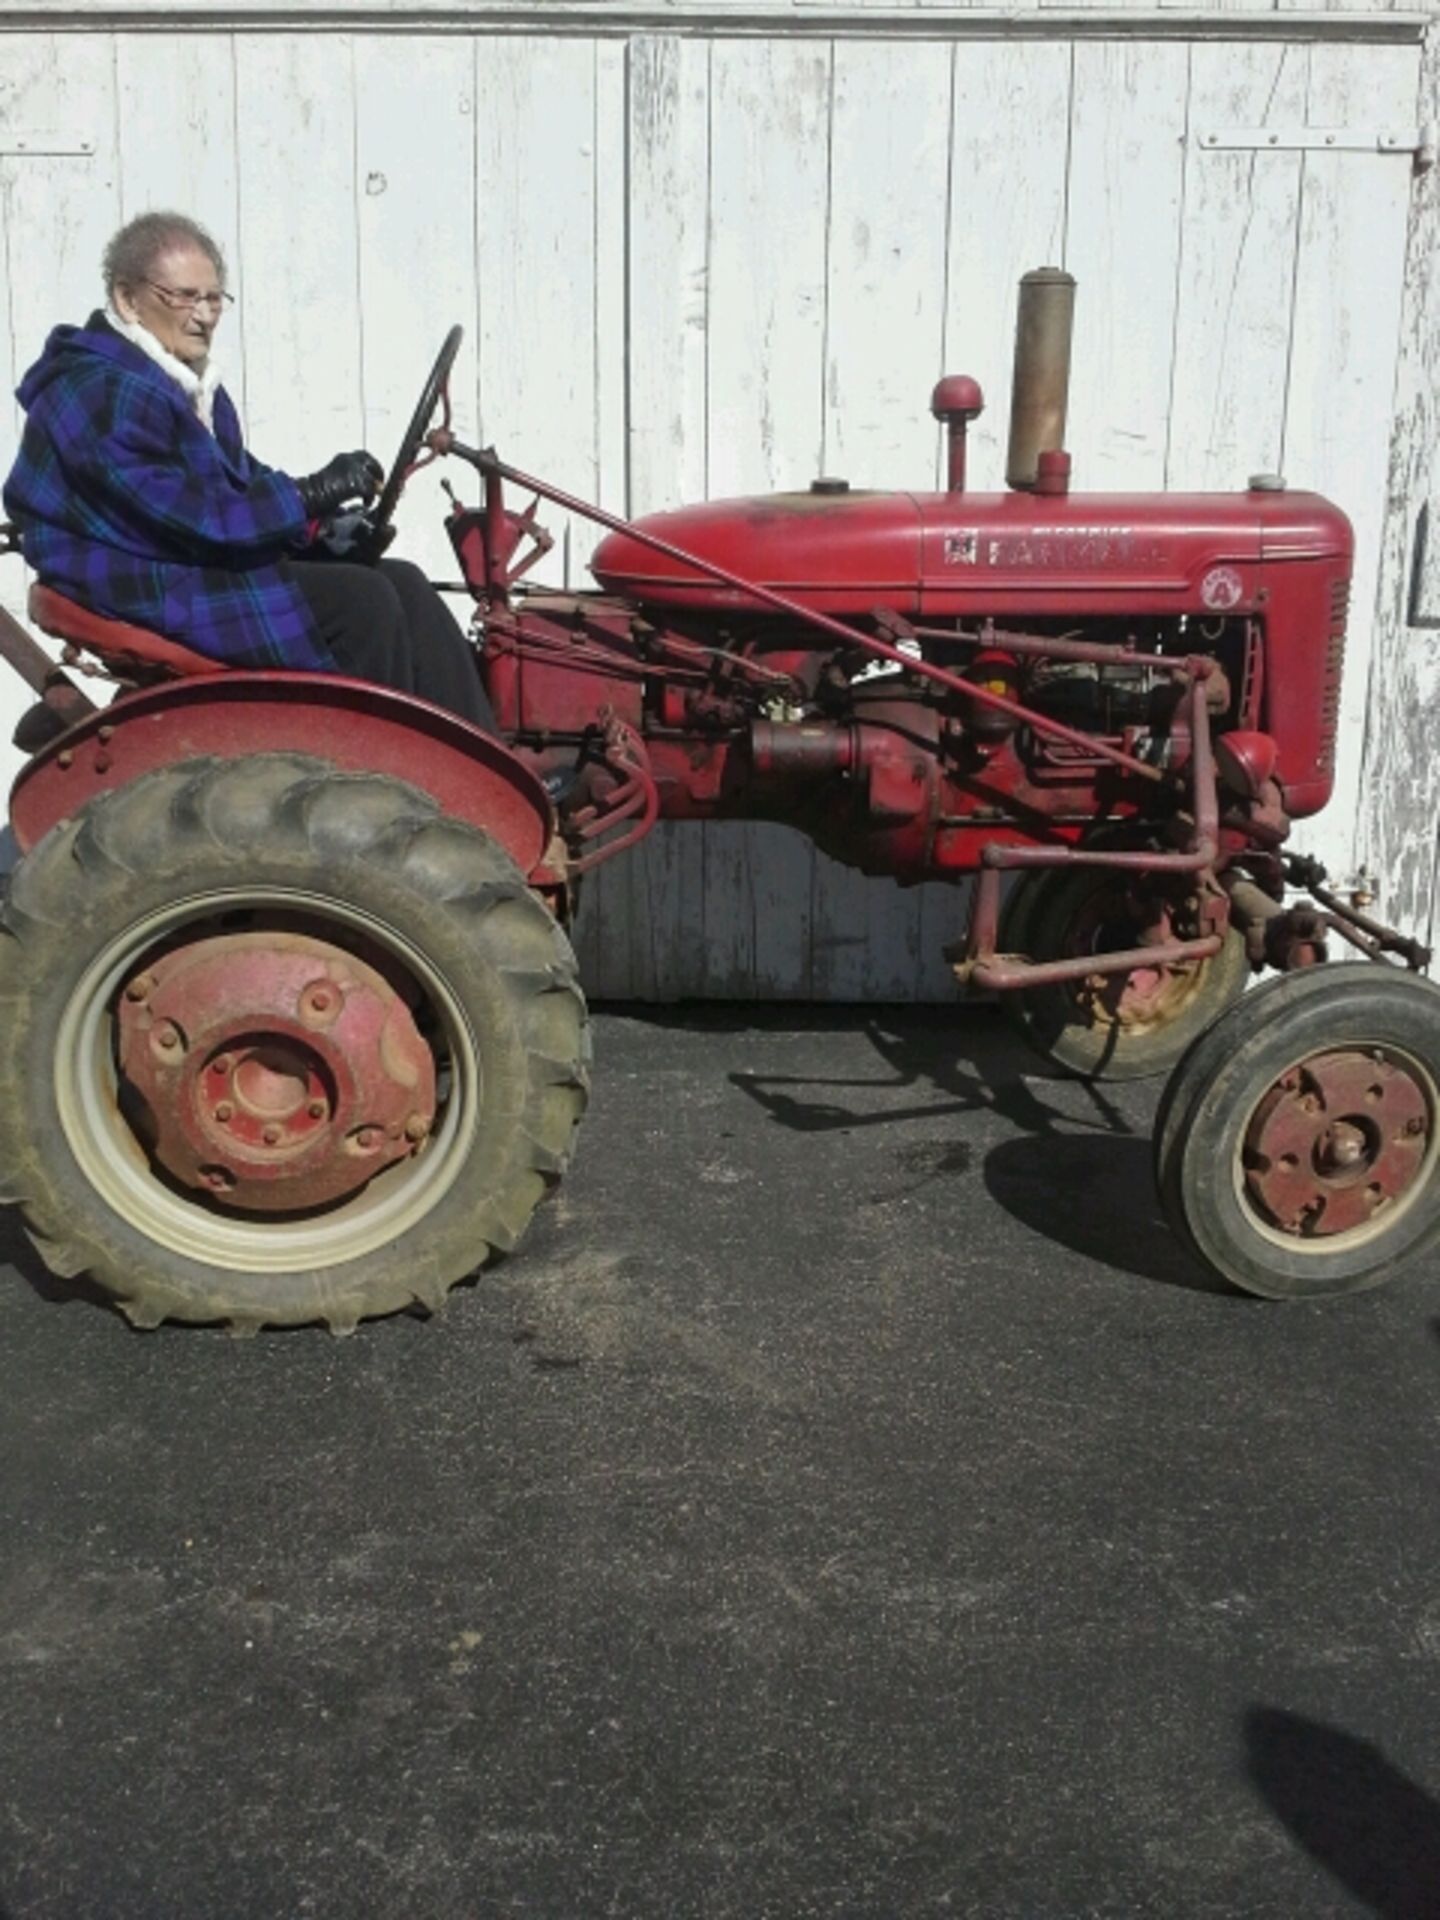 Farmall Super A  This has been the family tractor (Irene's), Purchased  in 1951 and  has been very